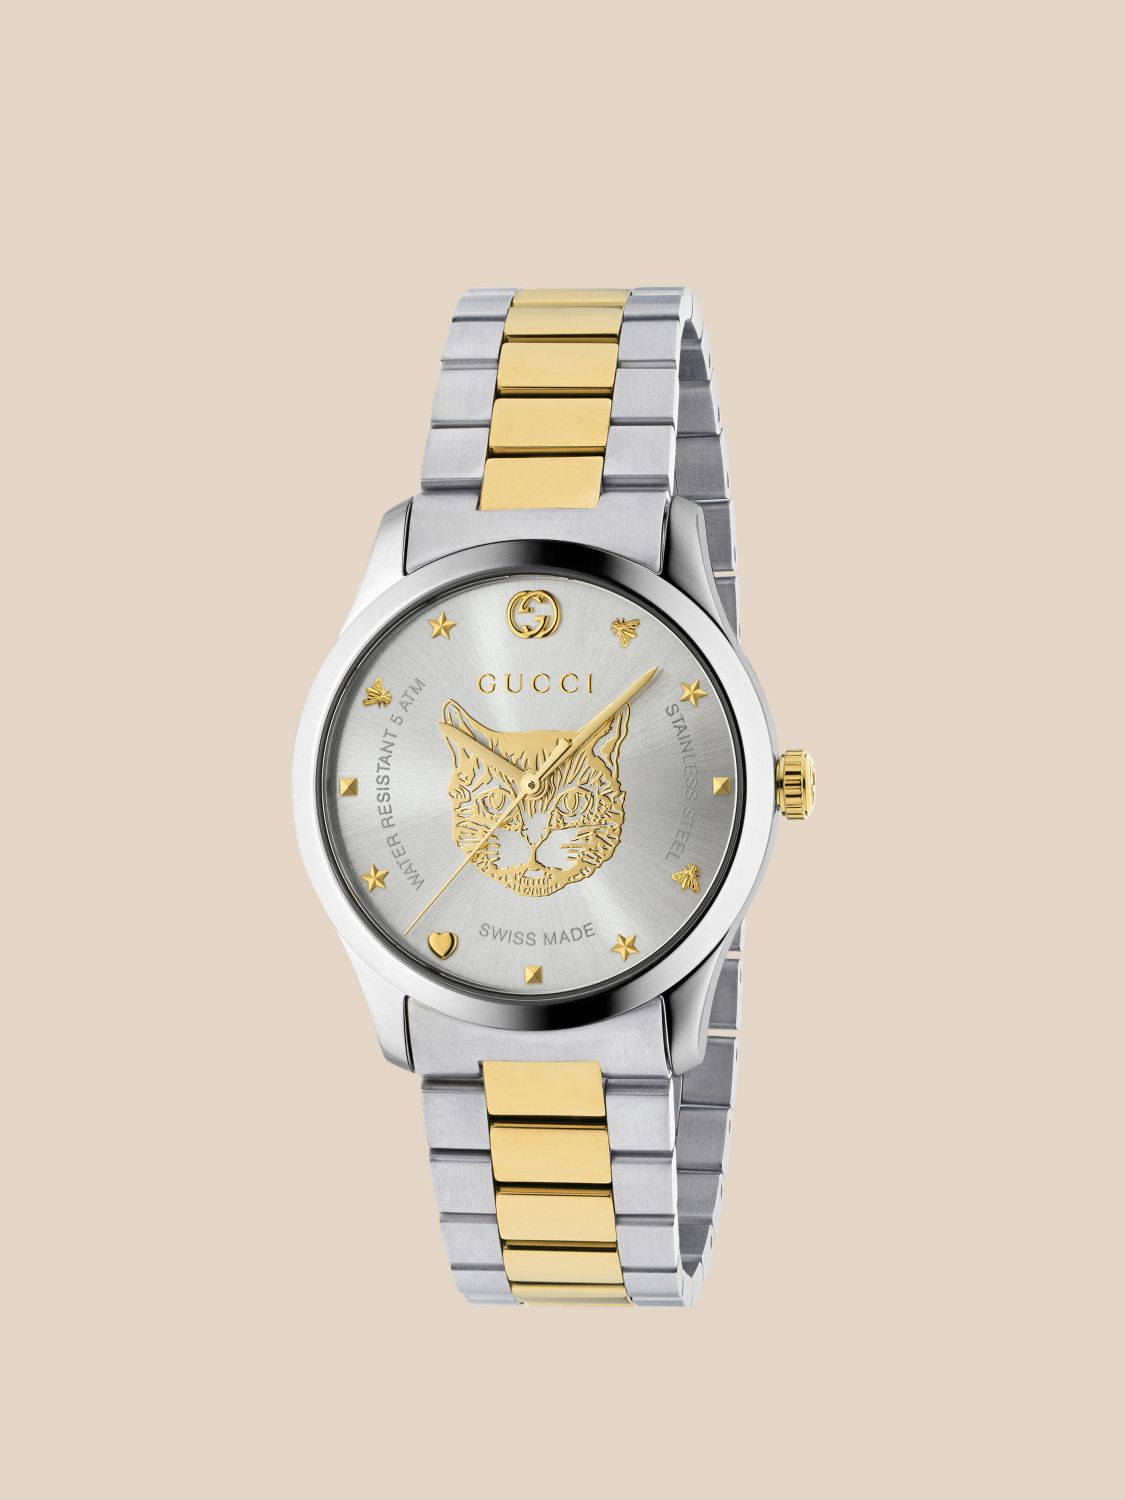 GUCCI: G-timeless iconic watch | Watch Men Steel Watch Gucci GIGLIO.COM